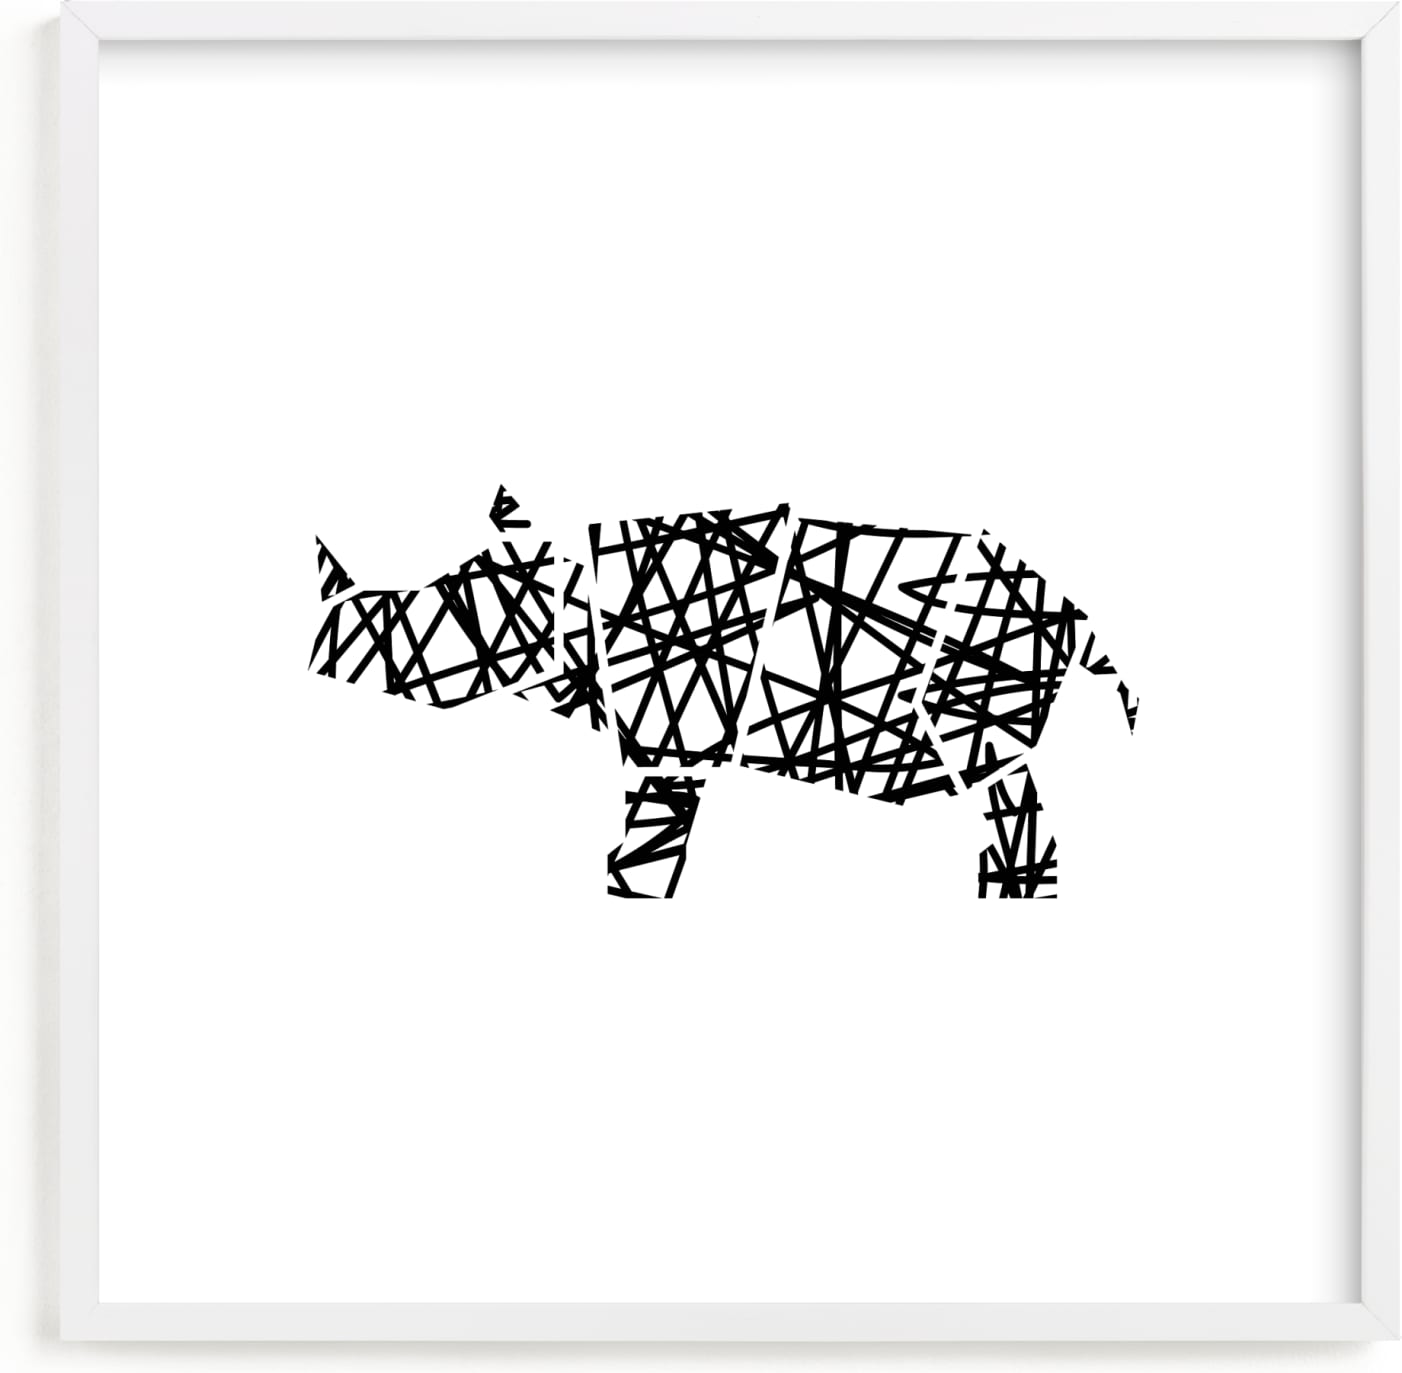 This is a black kids wall art by Noelle Stolworthy called Modern Abstract Scribble Rhino.